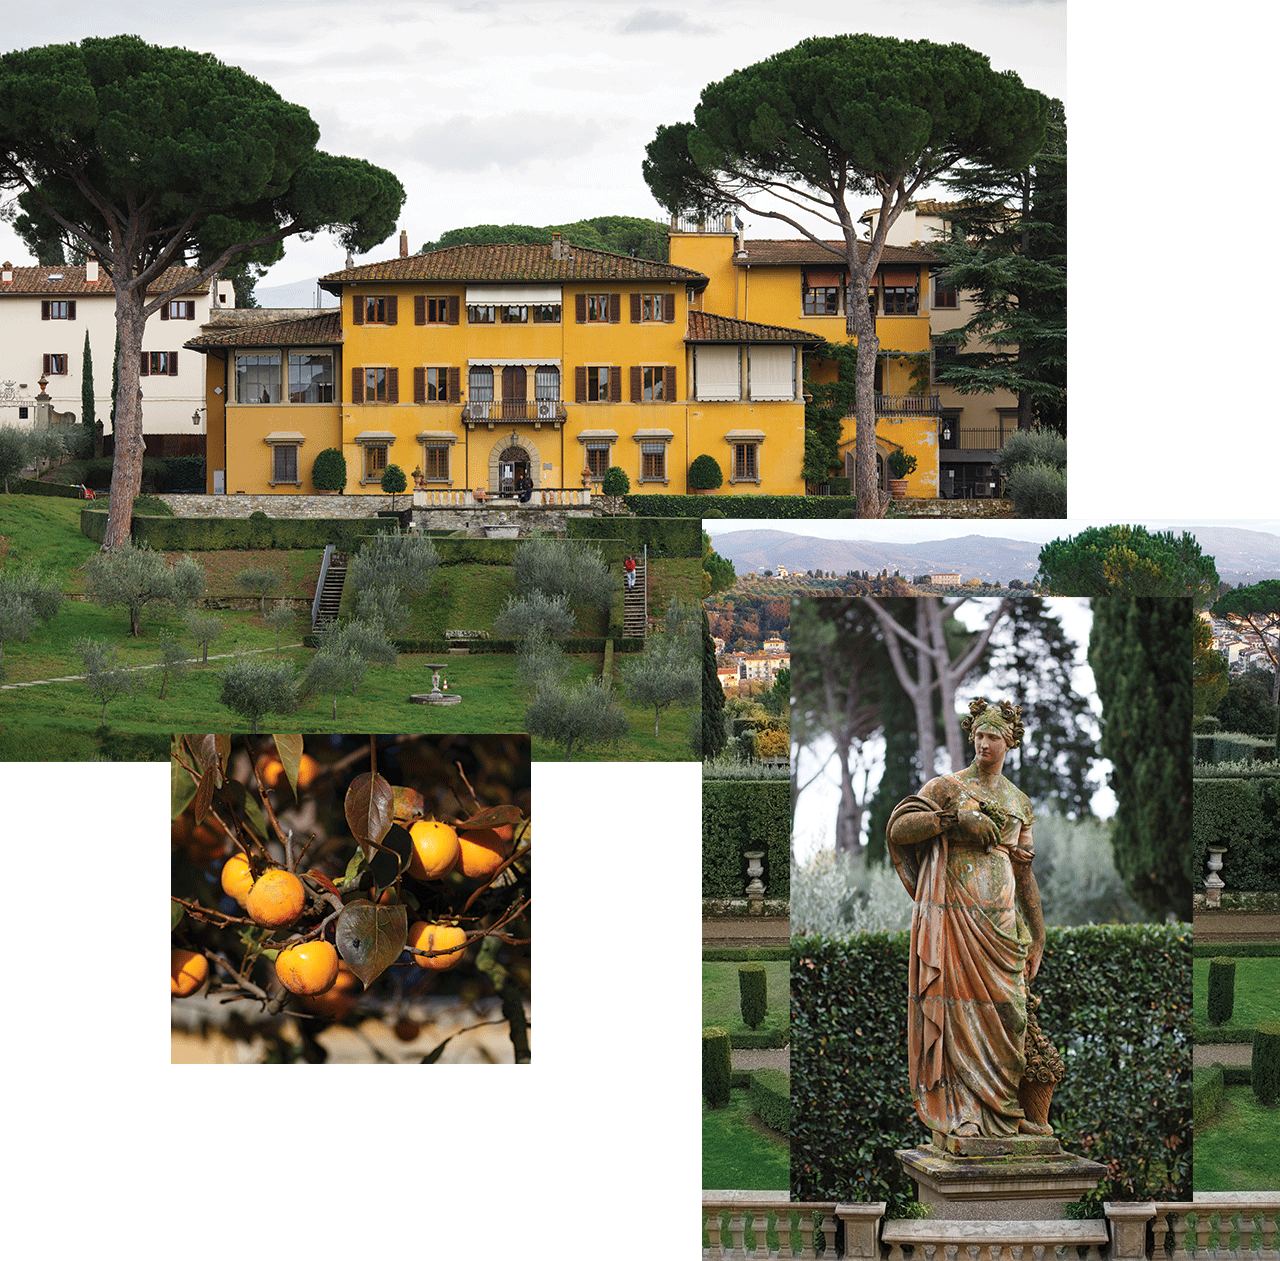 A collage of NYU Florence (clockwise from top): an NYU Florence building, a statue in a garden, and a close-up of a fruit tree.